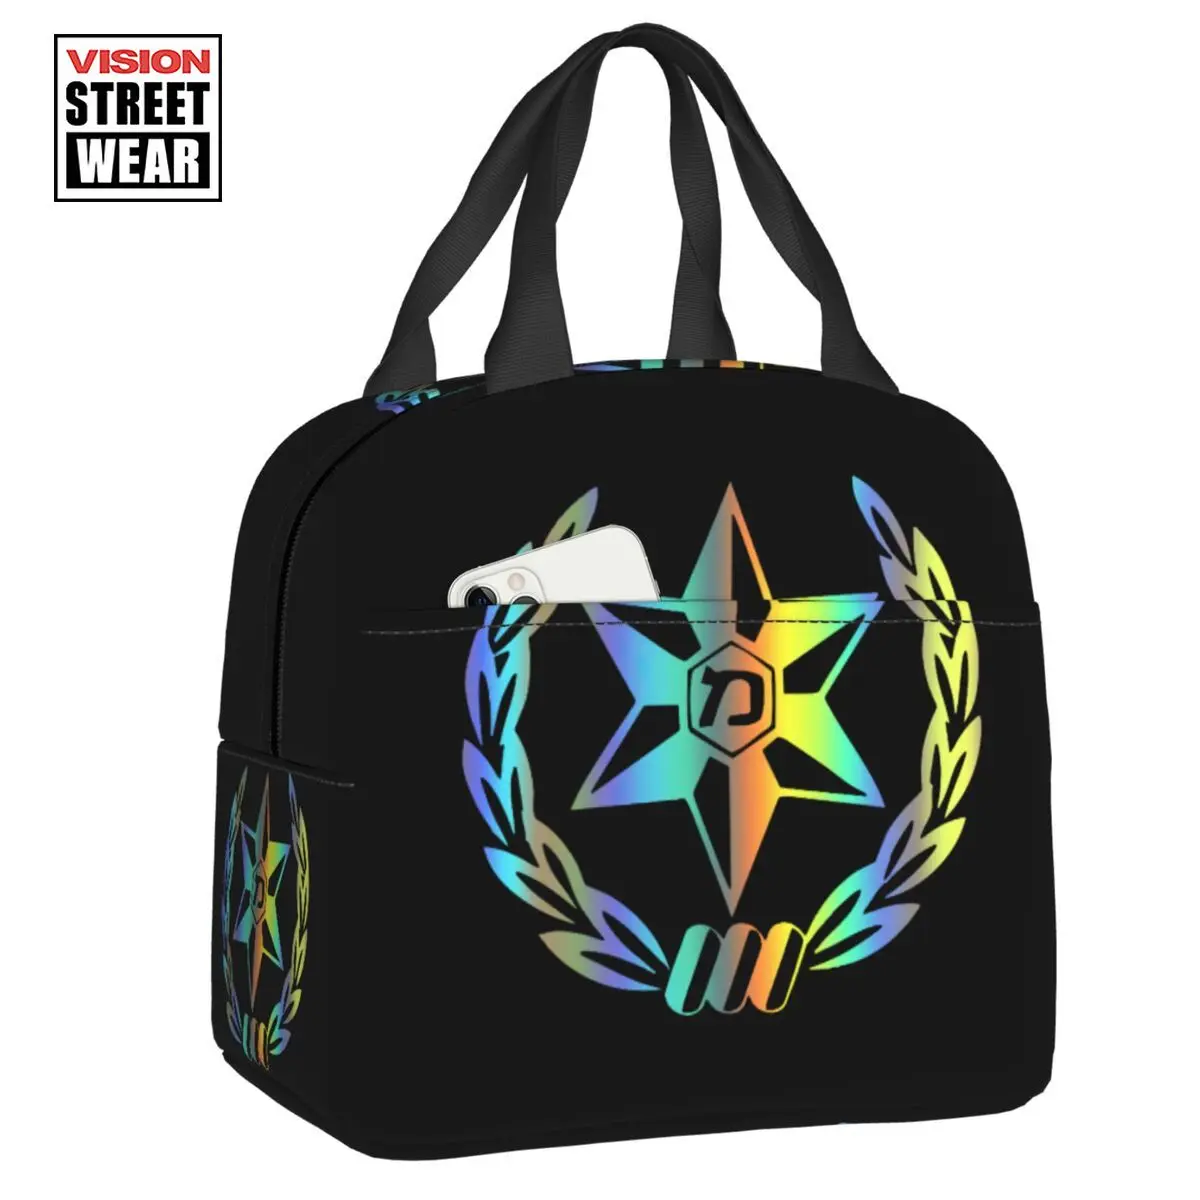 

2023 New Israel Police Force Insulated Lunch Tote Bag For Women Portable Thermal Cooler Food Lunch Box Work School Travel